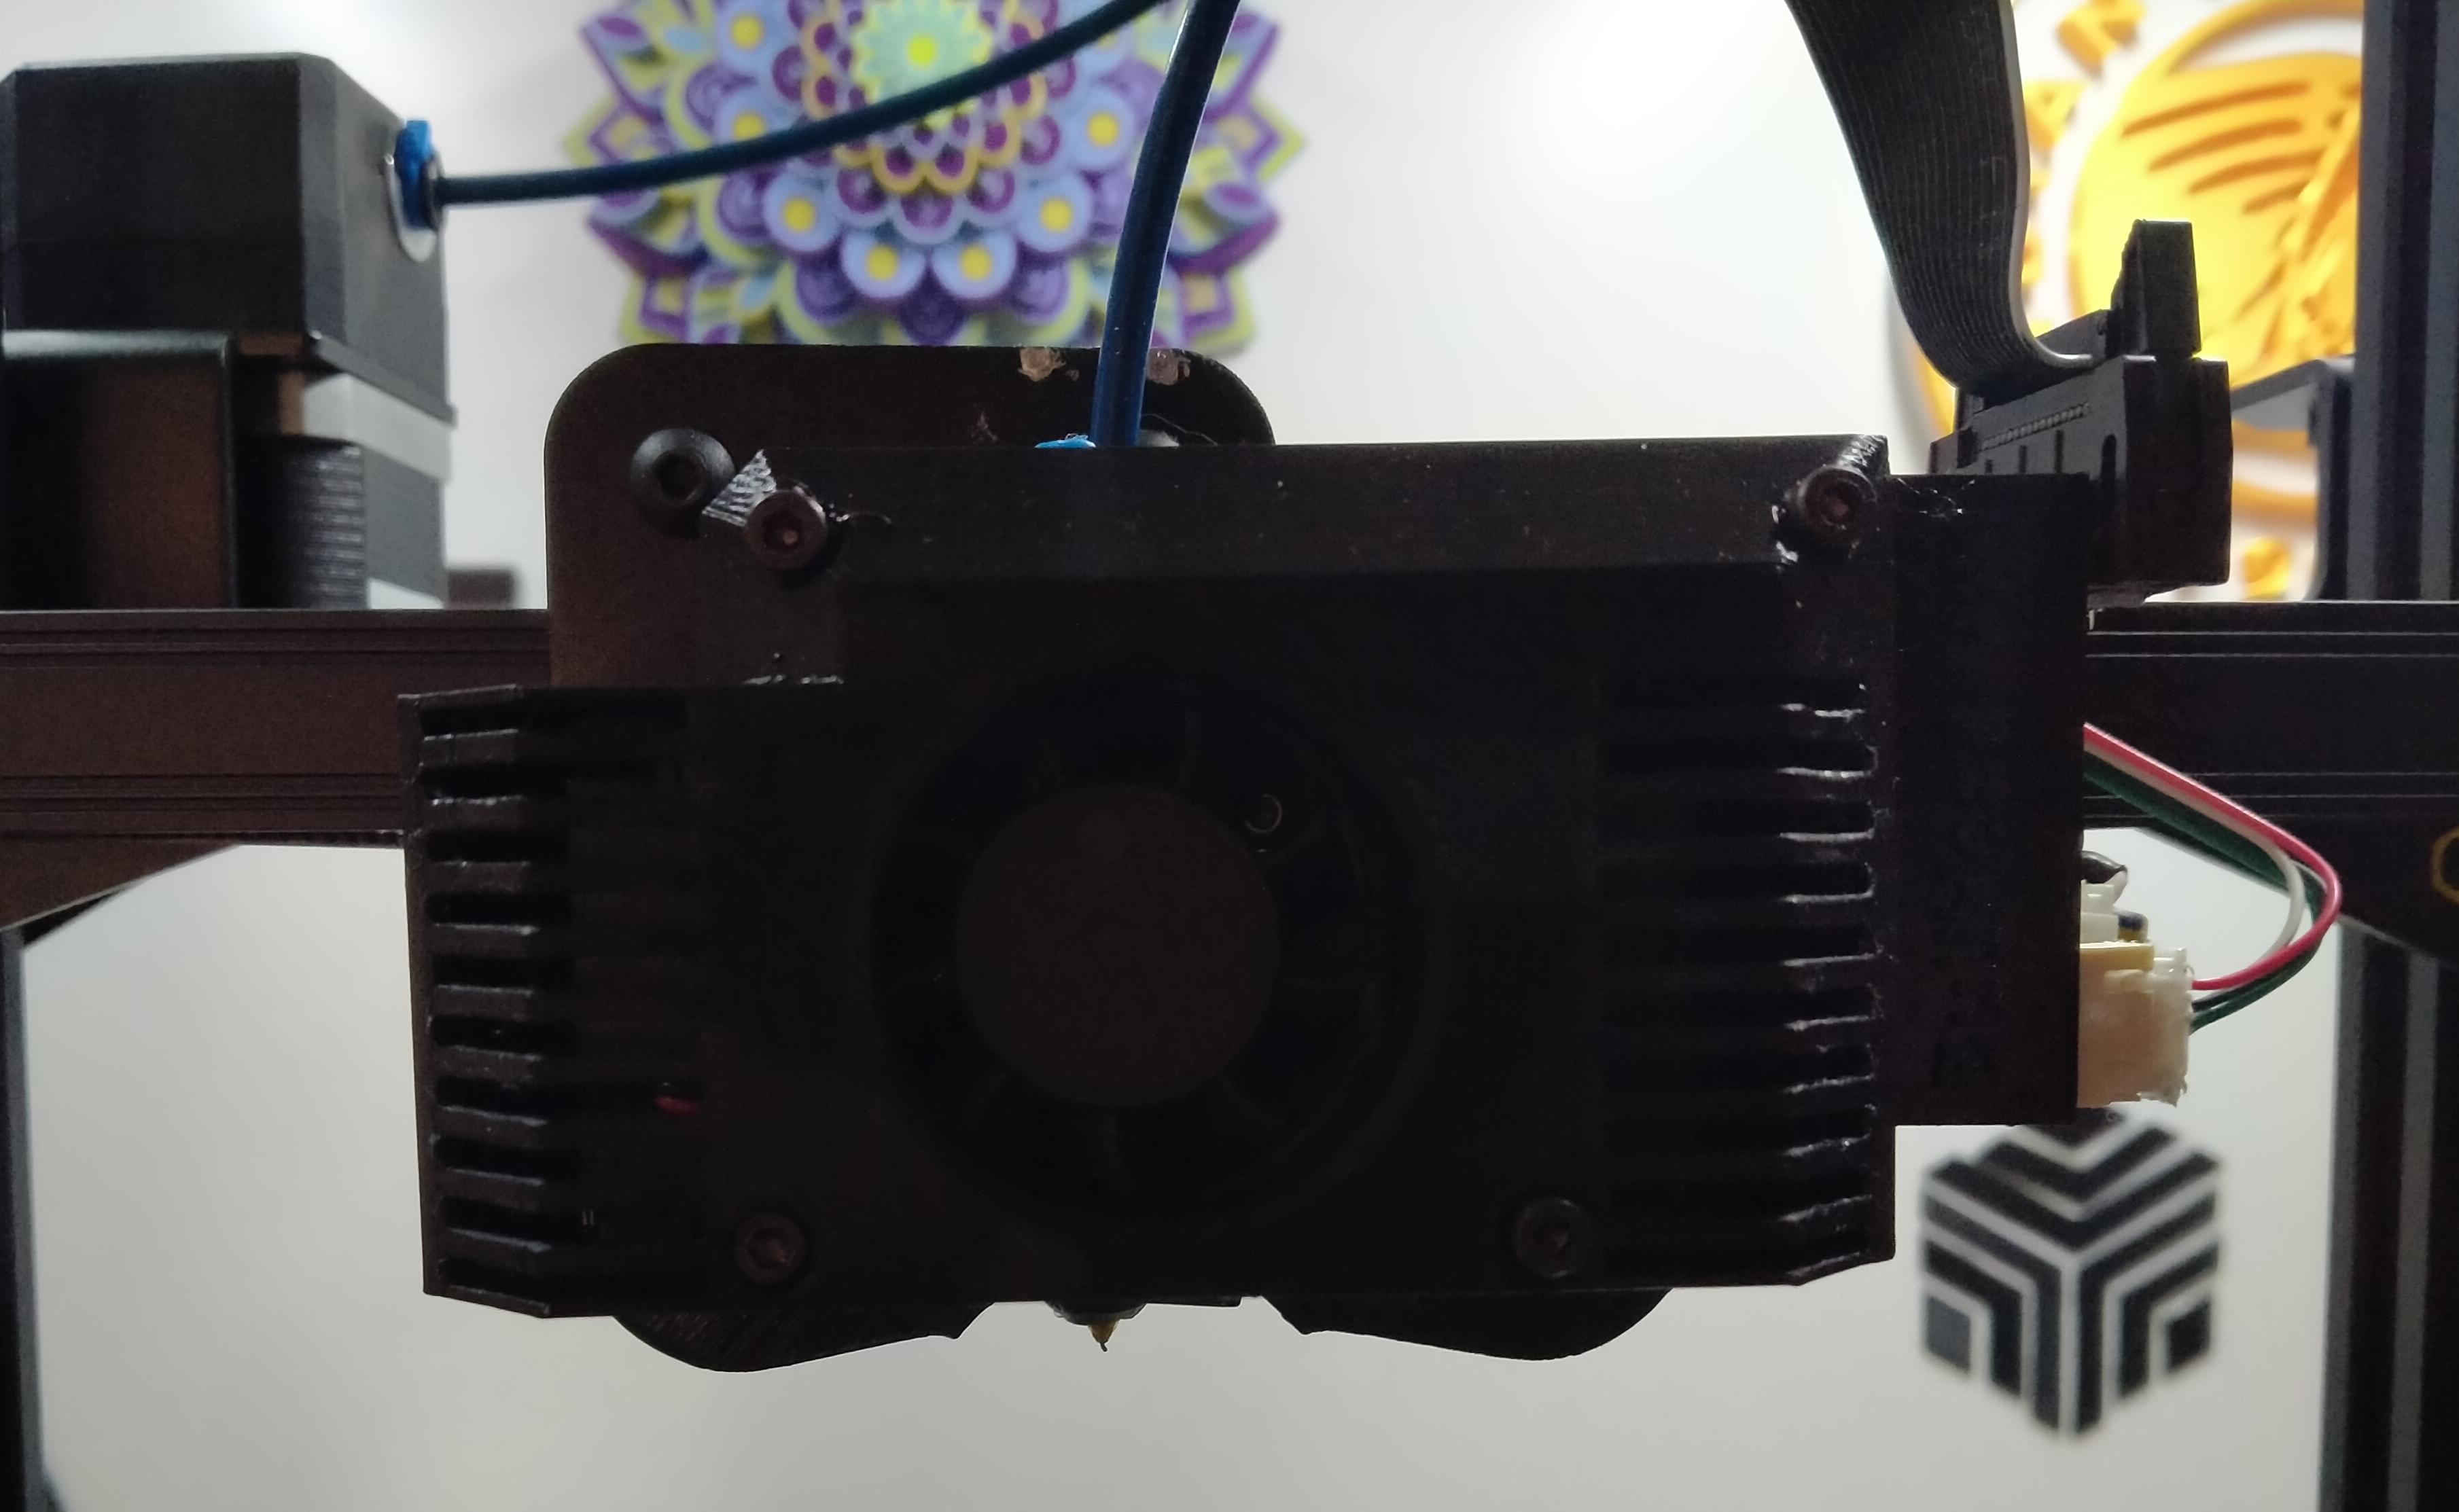 Dual Blower Fan Duct for Creality CR-6 SE - BullHead Mk1 - This is one of the best triple fan upgrades for the CR 6 SE i have tested. Works great, Very happy it.
Thanks for sharing the design. - 3d model